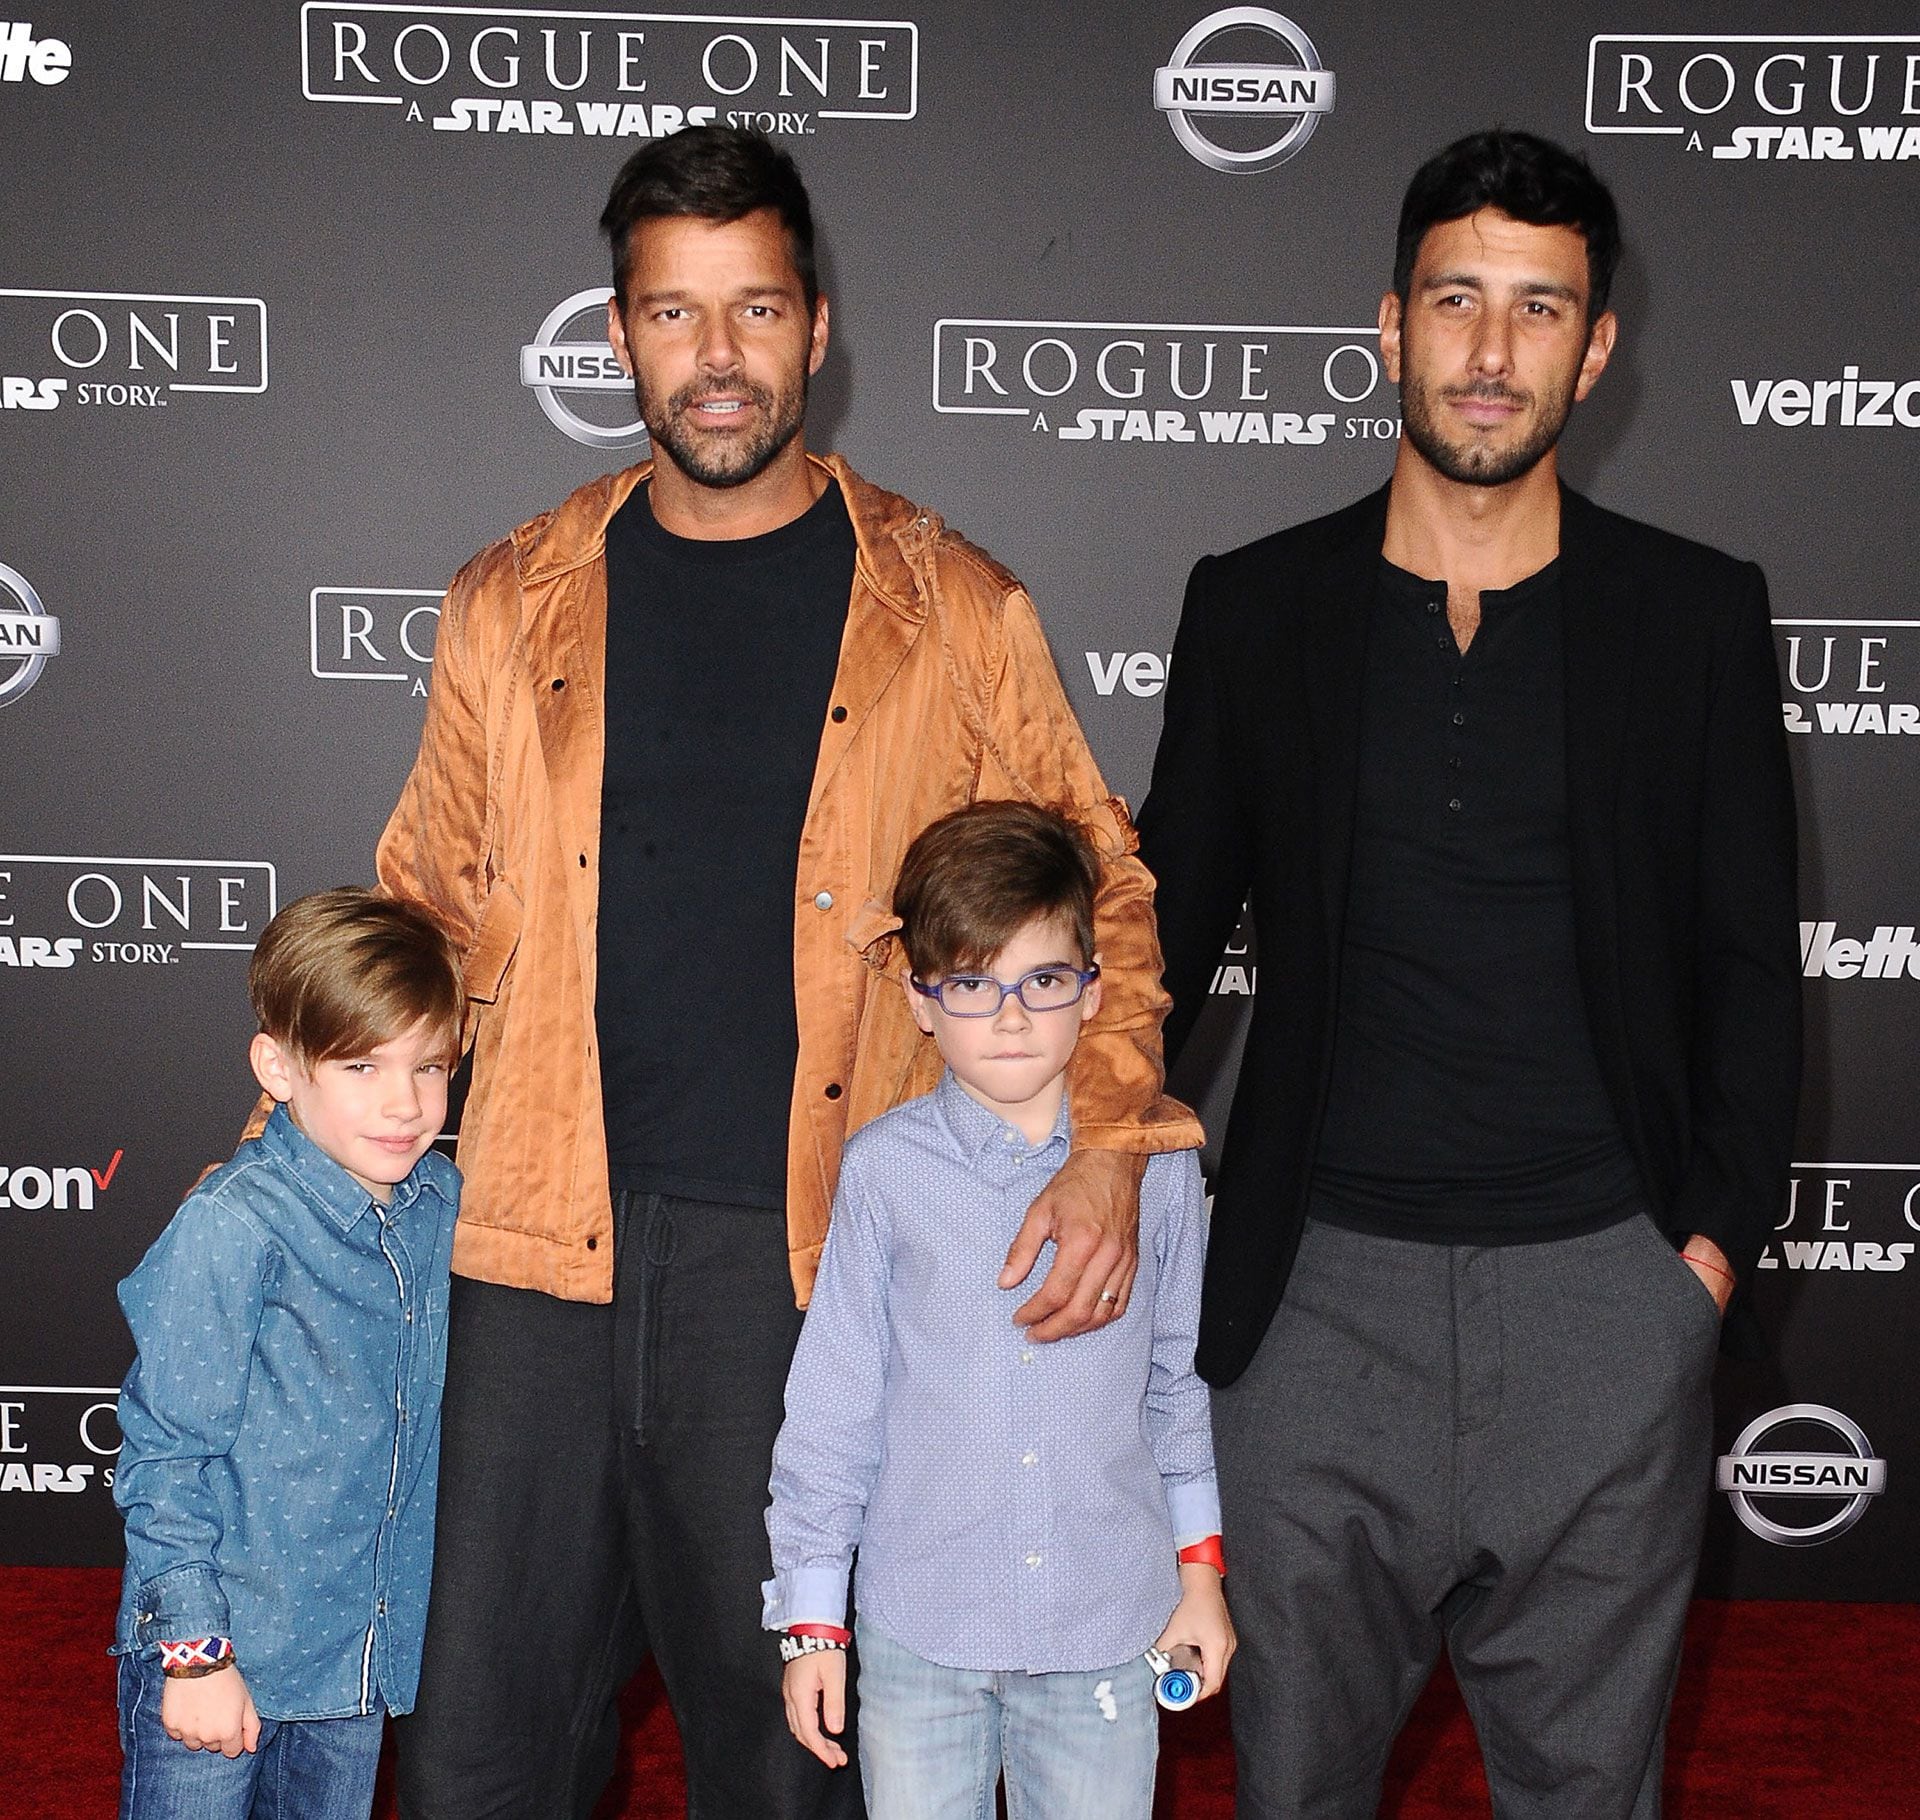 Recording artist Ricky Martin (2nd L), artist Jwan Yosef (R), and sons Matteo Martin and Valentino Martin attend the premiere of "Rogue One: A Star Wars Story" at the Pantages Theatre on December 10, 2016 in Hollywood, California.  (Getty Images)